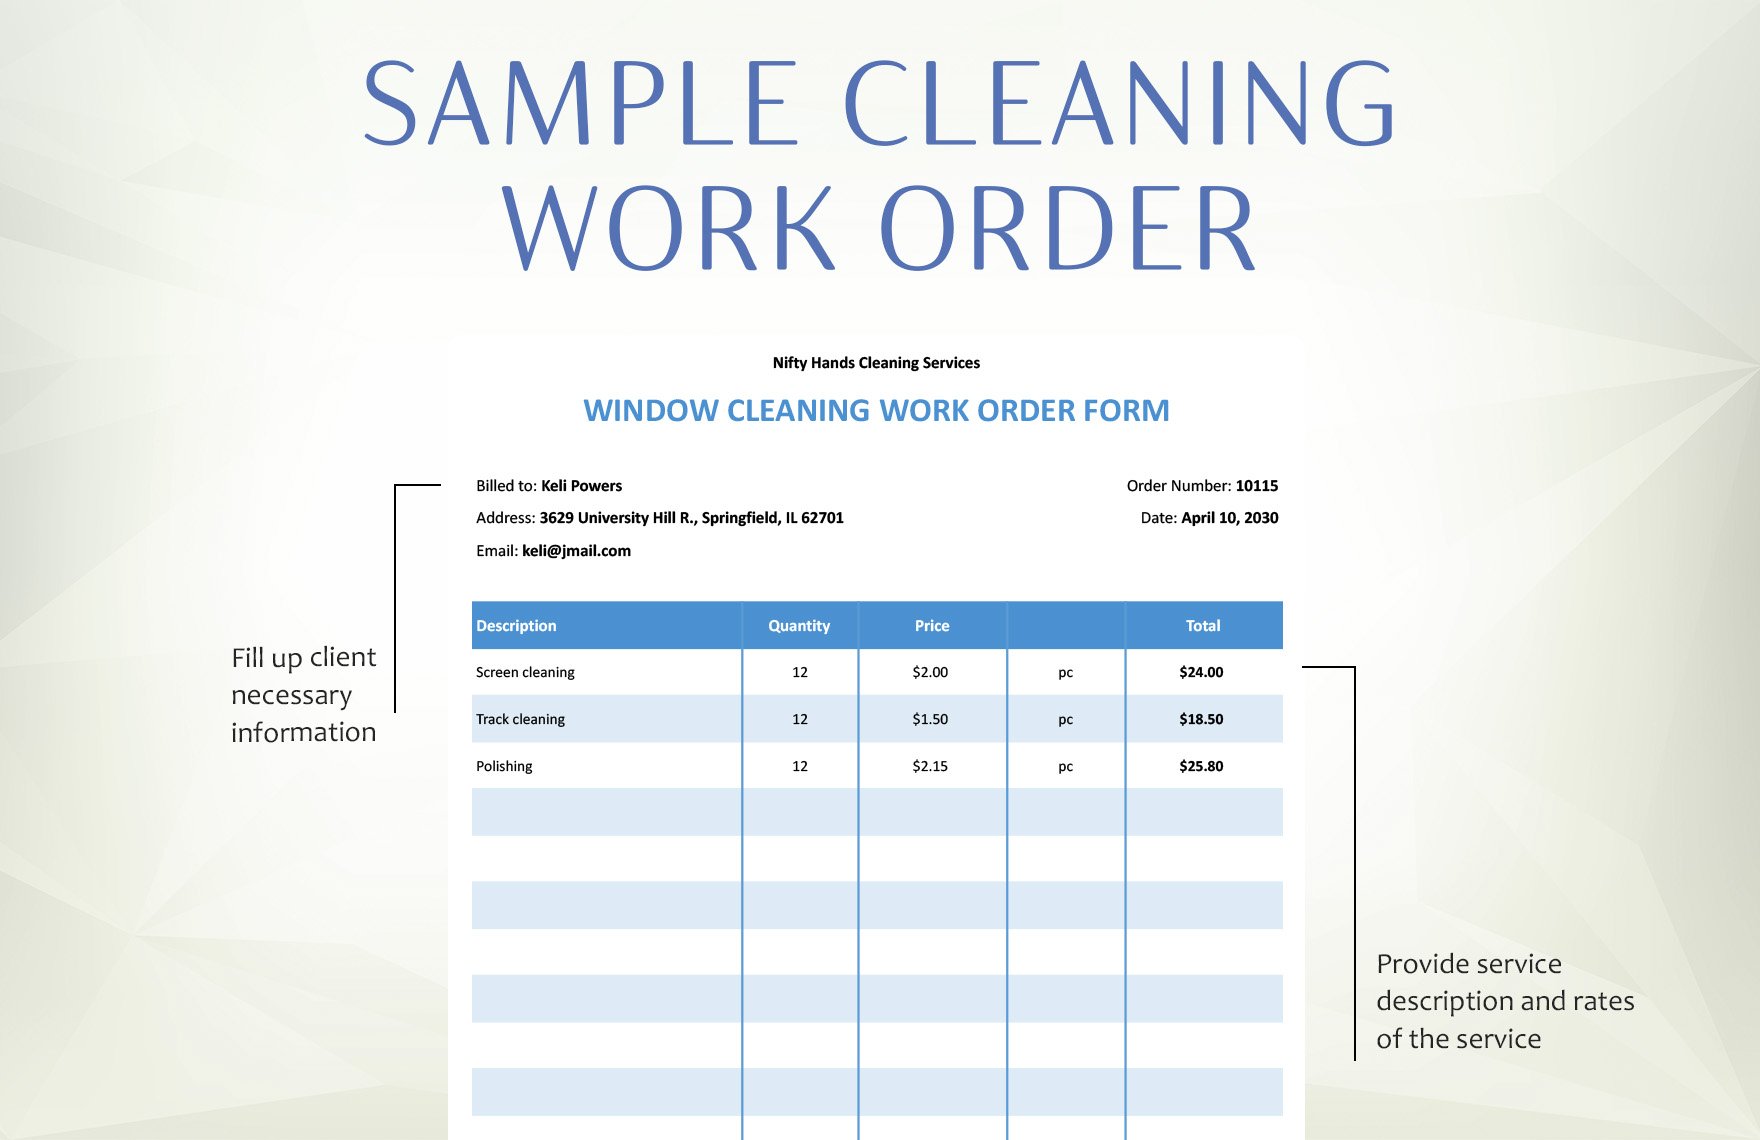 Sample Cleaning Work Order Template